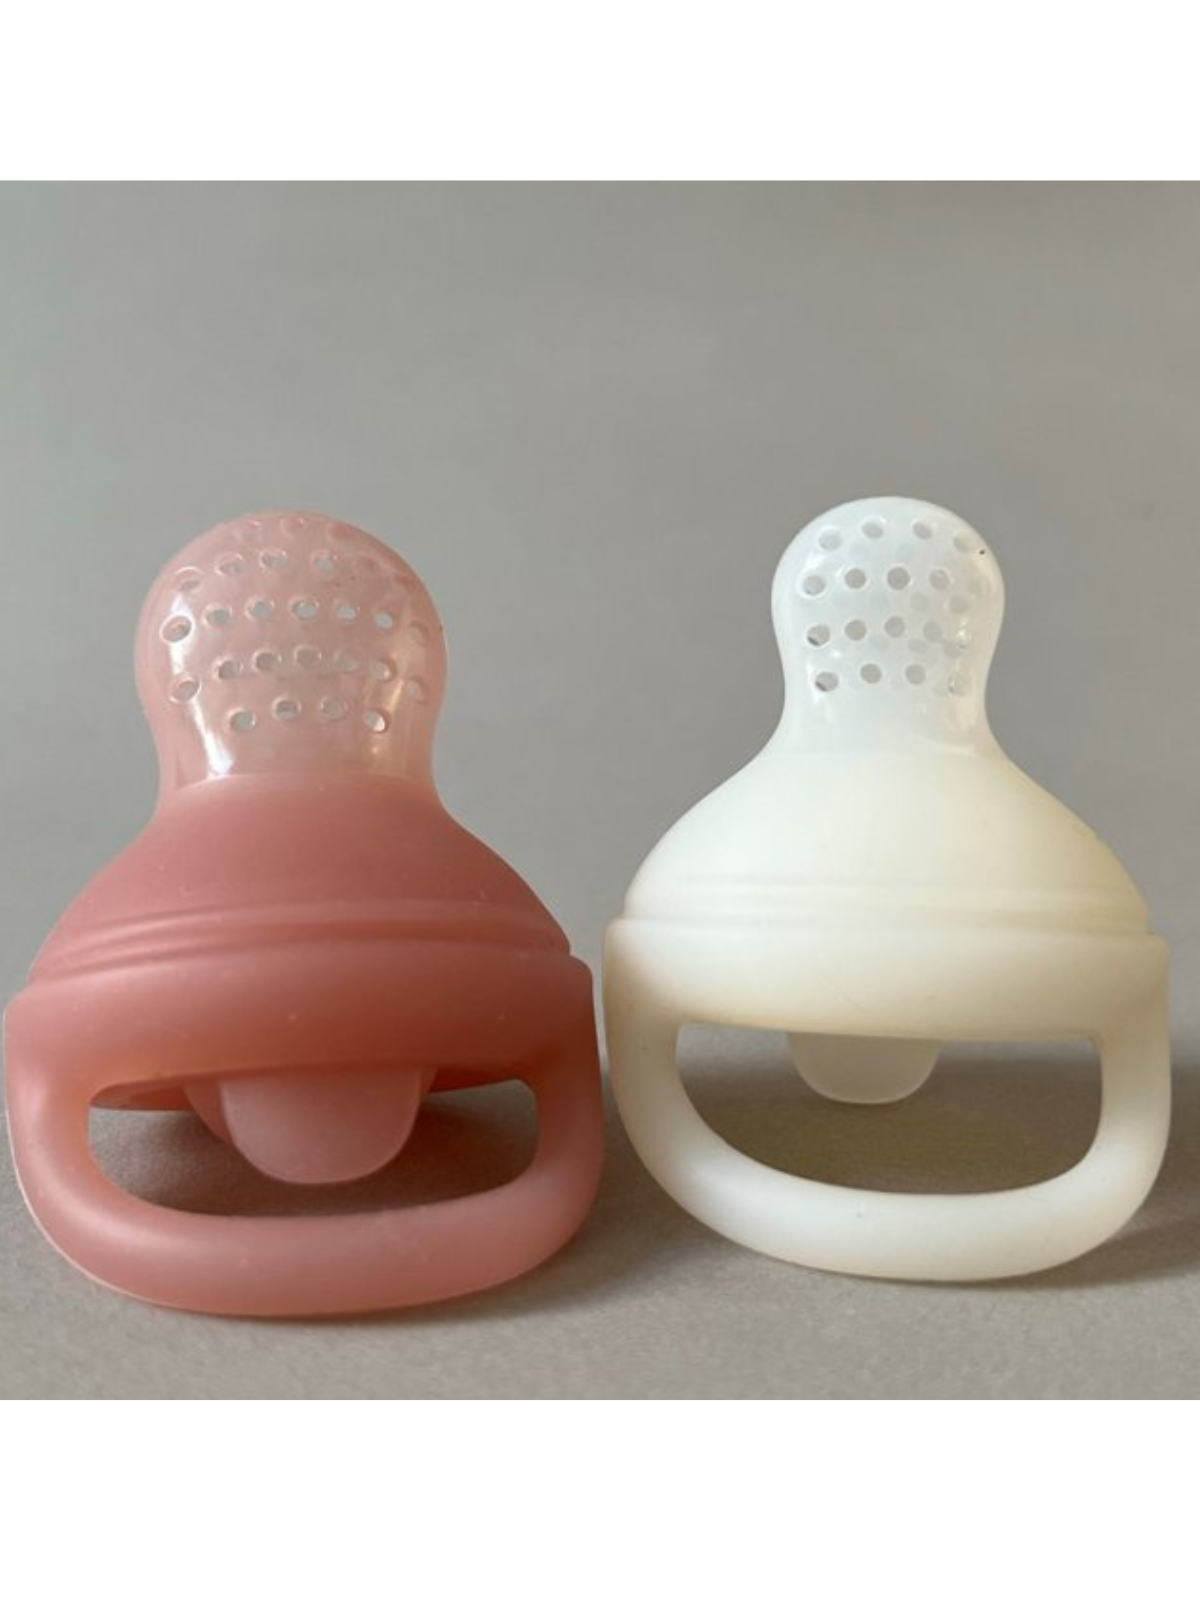 Food and Fruit Feeder Pacifier Set, Snow/Blush